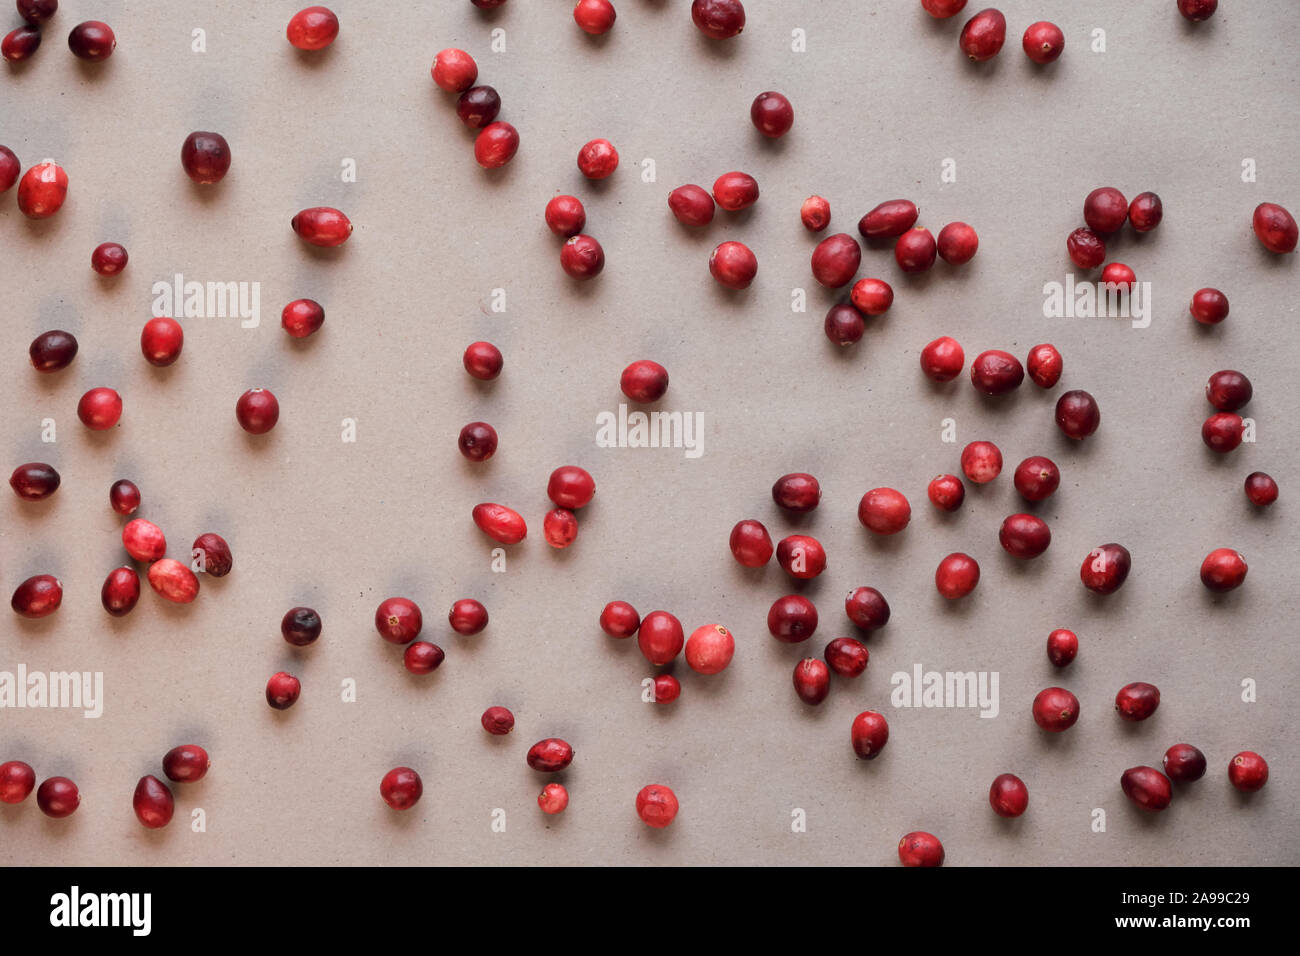 Raw fresh cranberry berry, view from above. Cranberry background, top view, flat lay on craft paper. Cranberries scattered on recycled brown paper. Stock Photo